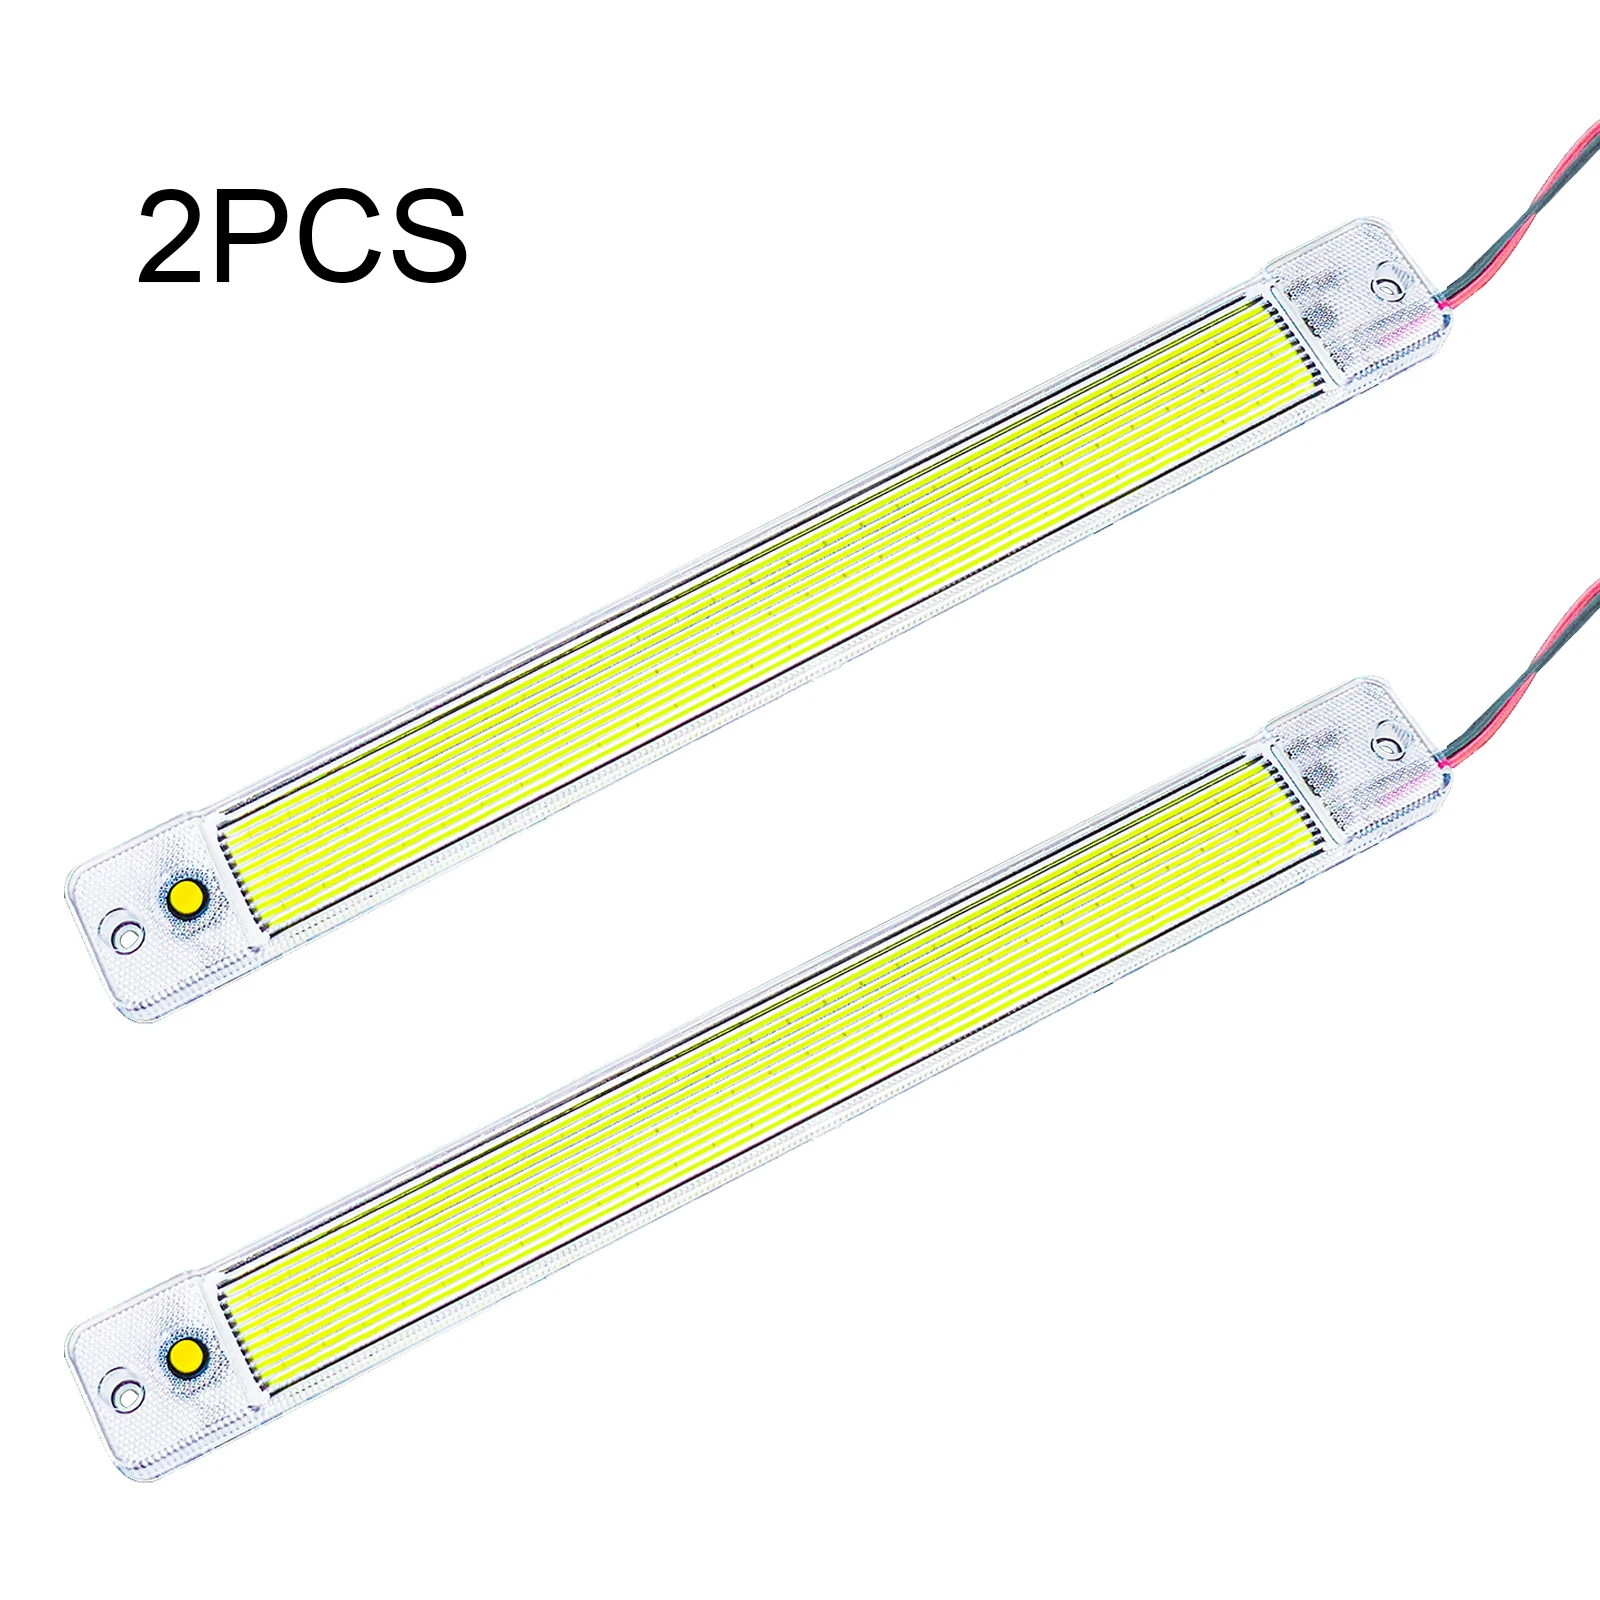 

2 Pcs 84 LED 10W Car Interior Led Light Bar White Light Tube With Switch For Van Lorry Truck RV Camper Boat Indoor Ceiling Light